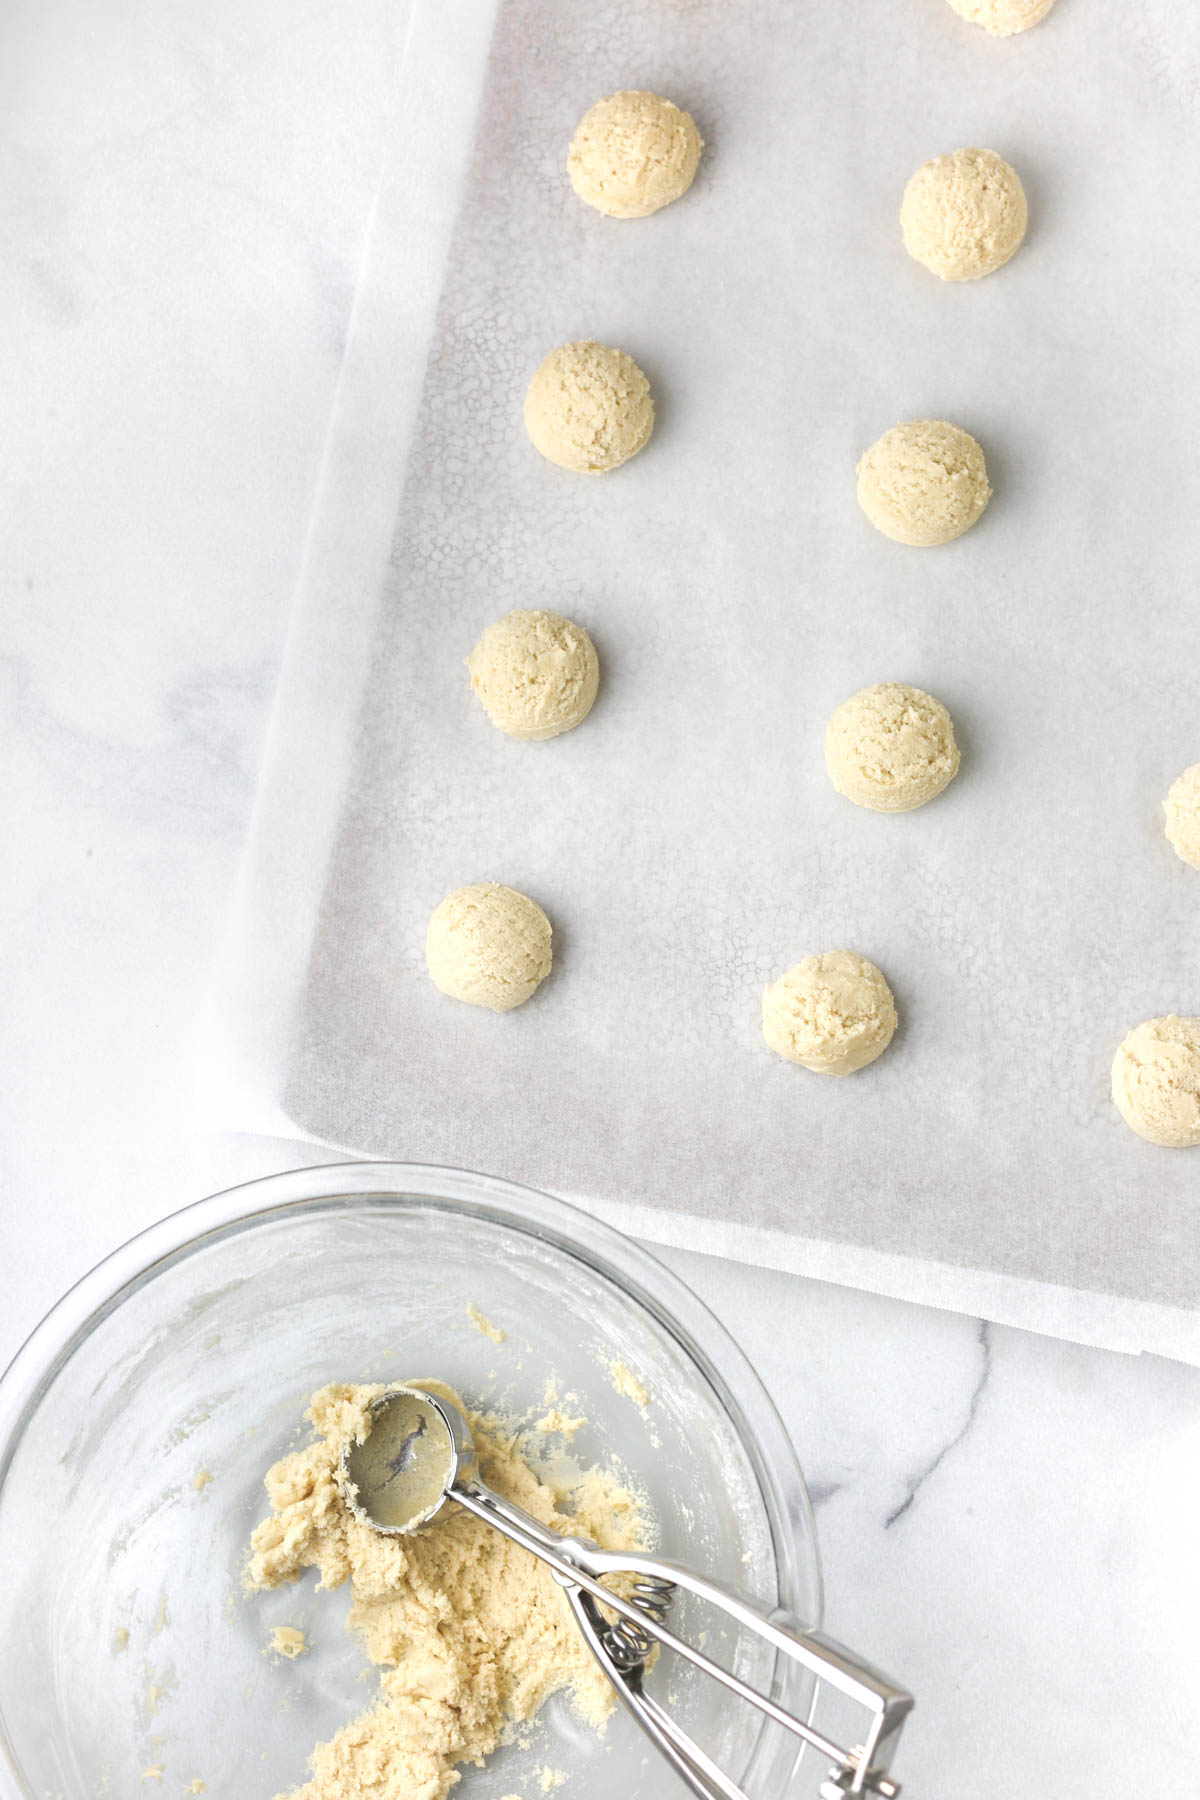 Scooping the cookie dough into balls and placing them on the baking sheet.